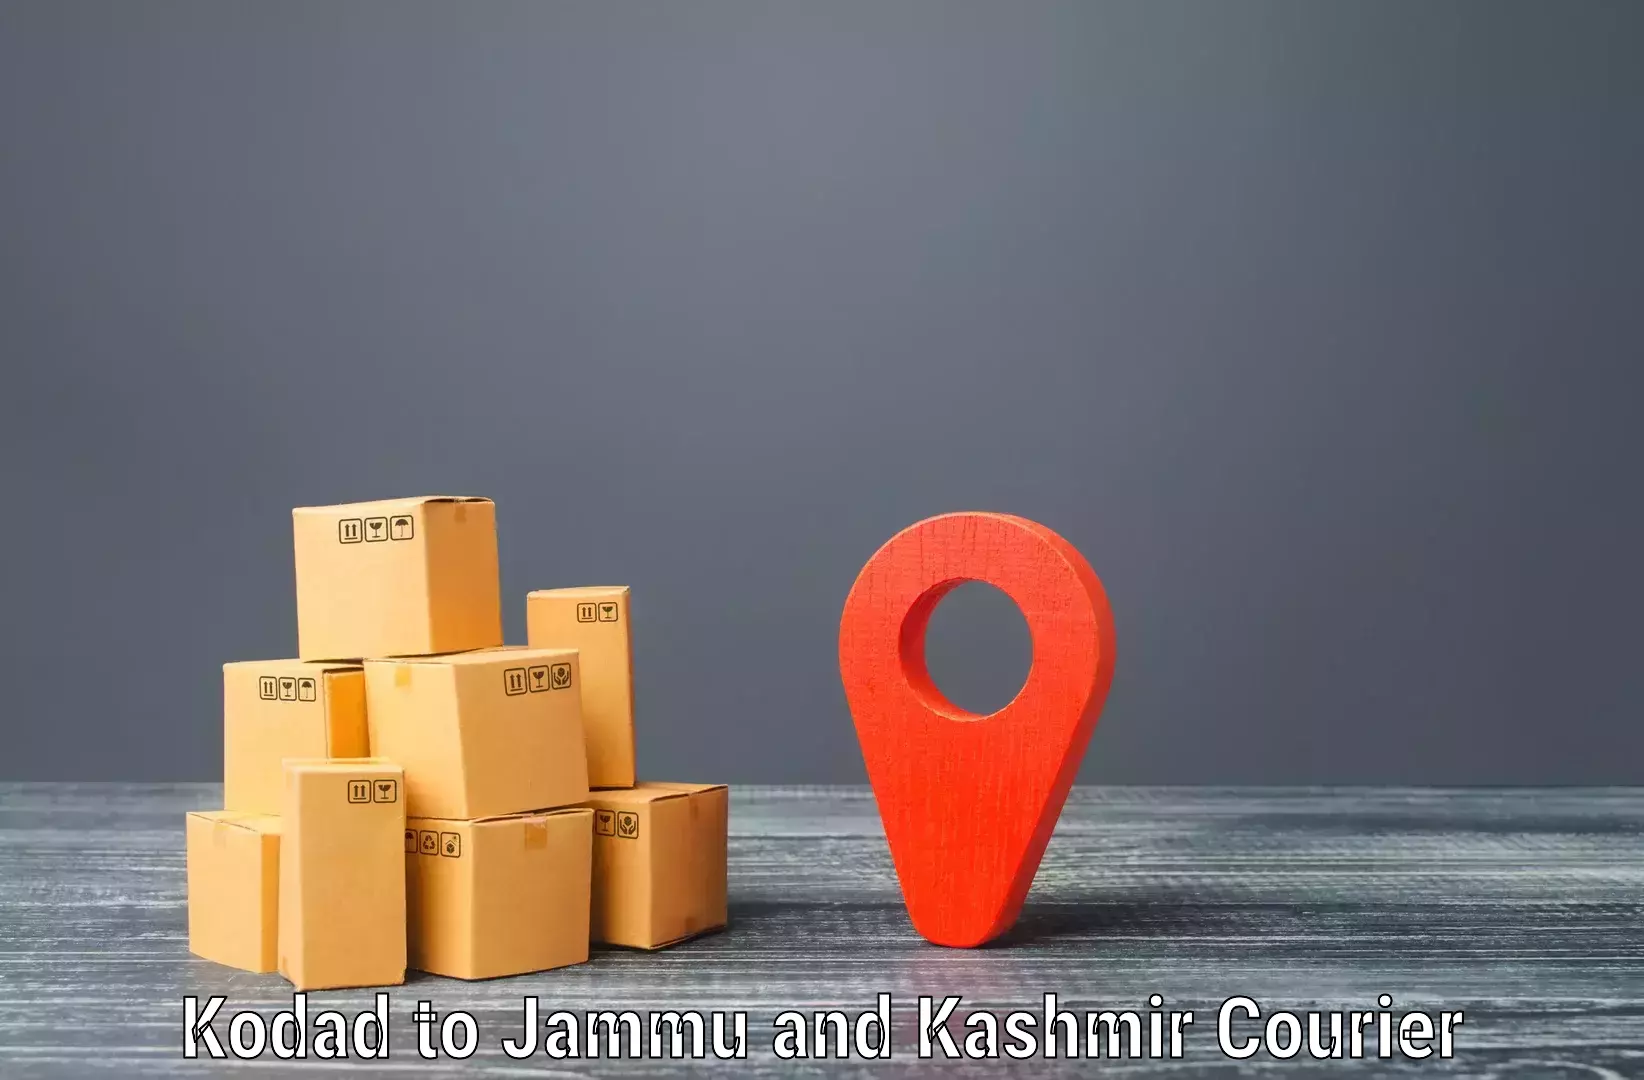 Overnight delivery services Kodad to Pulwama